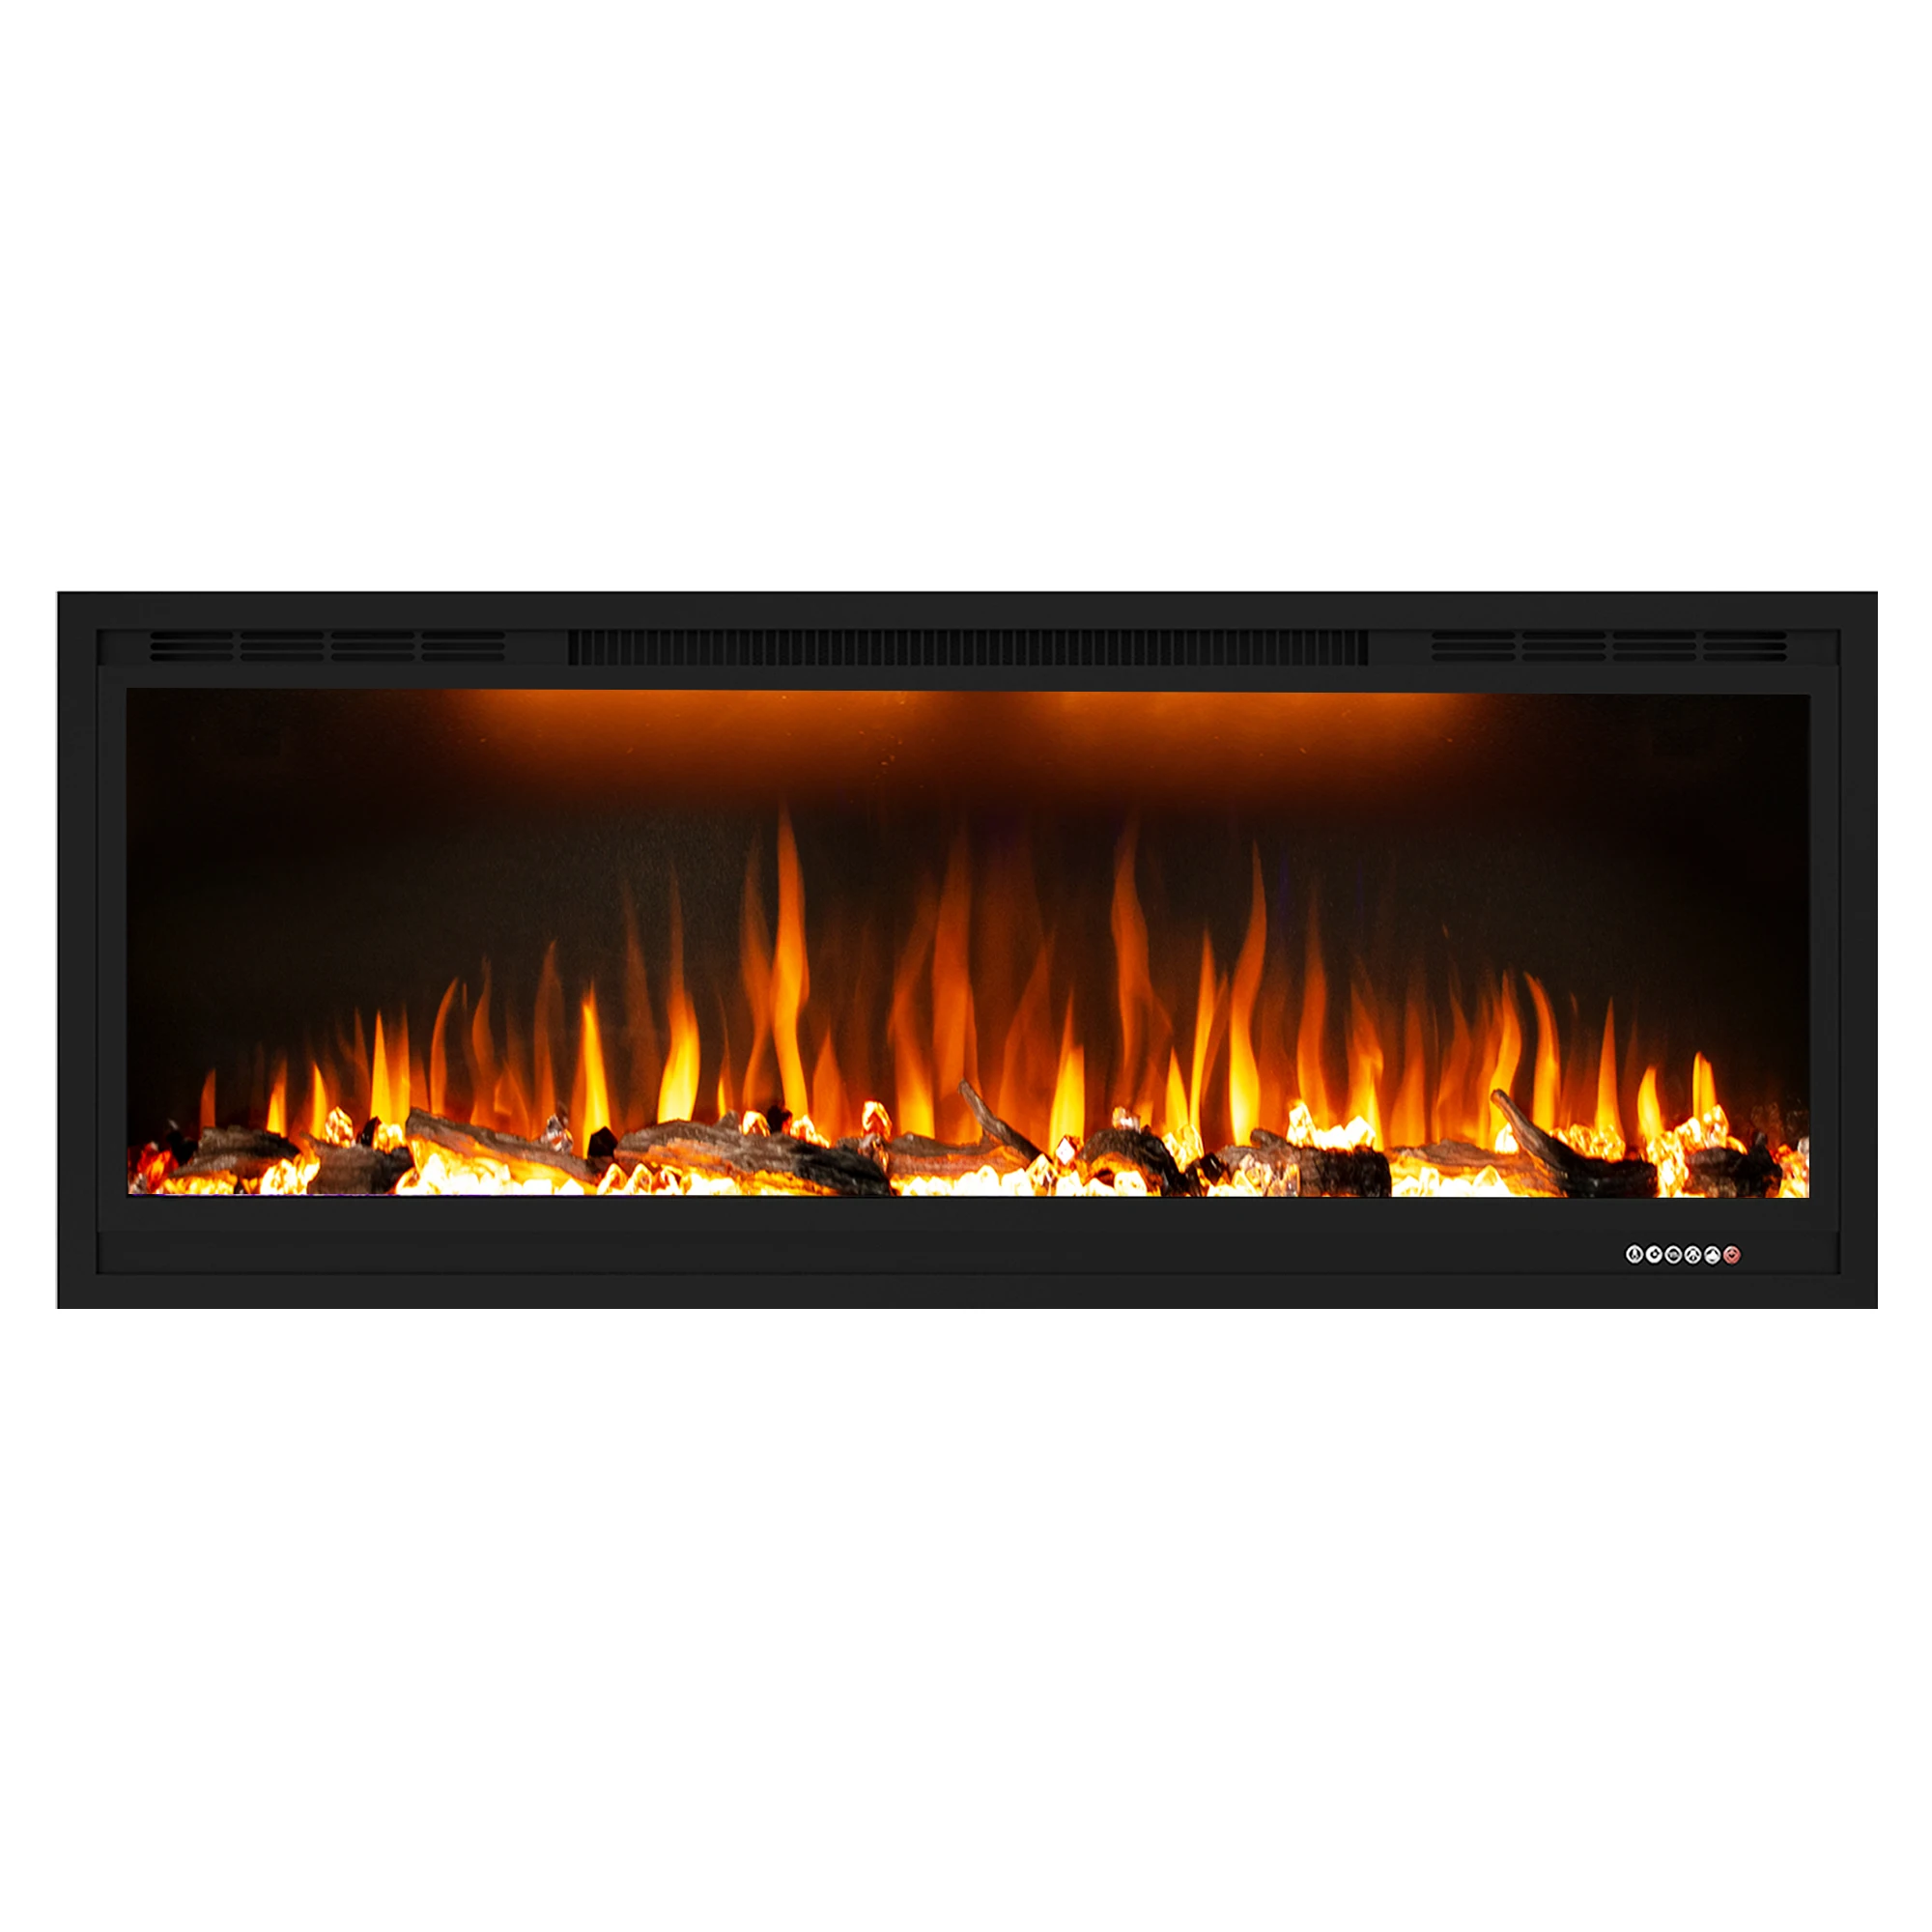 UK's most realistic flames at wholesale prices